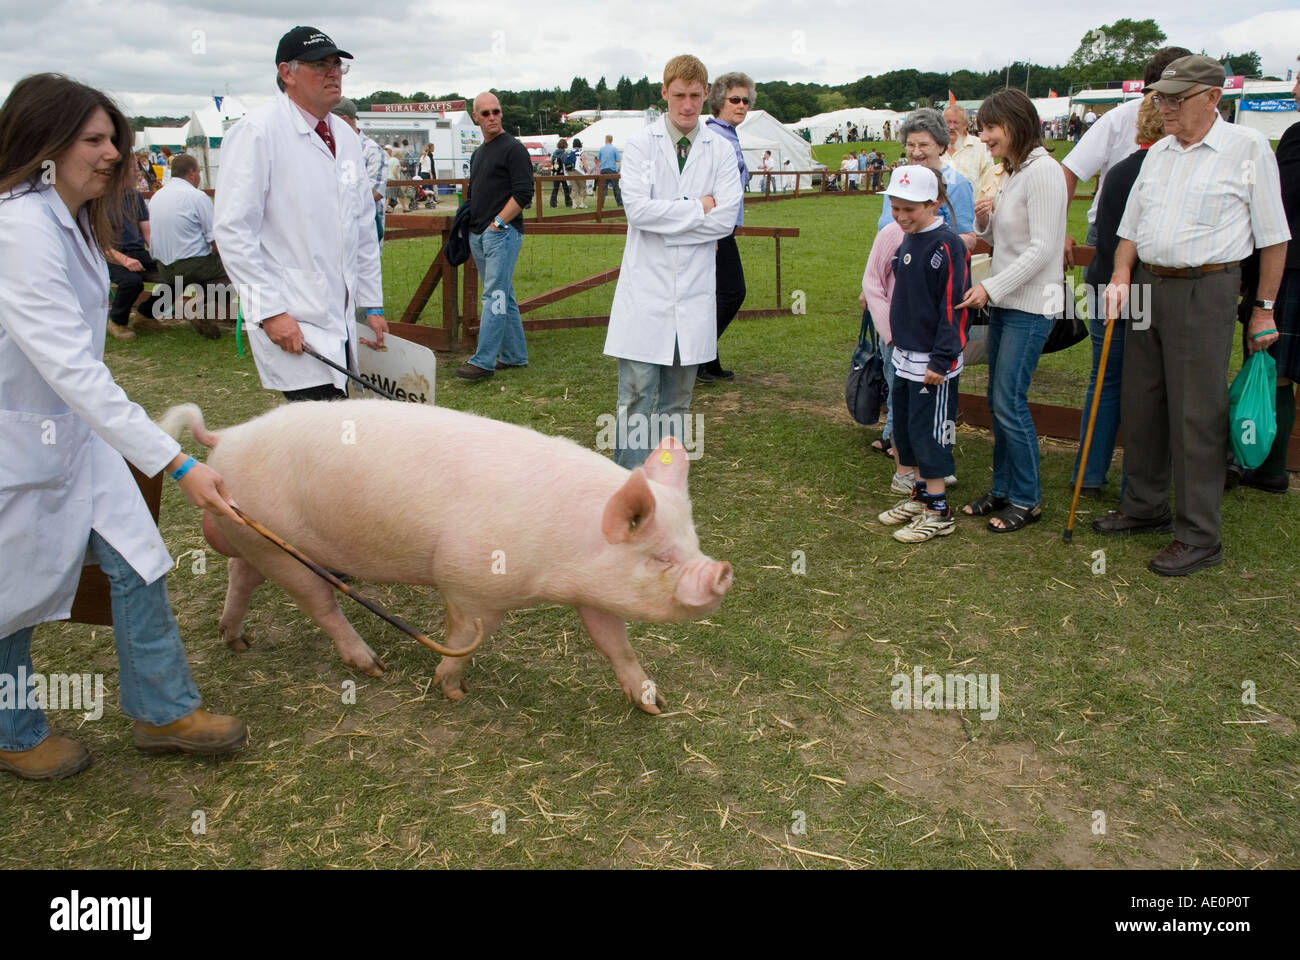 A pig on its way to be judged for the BPA Pig of the Year competition at the Great Yorkshire Show Harrogate Stock Photo